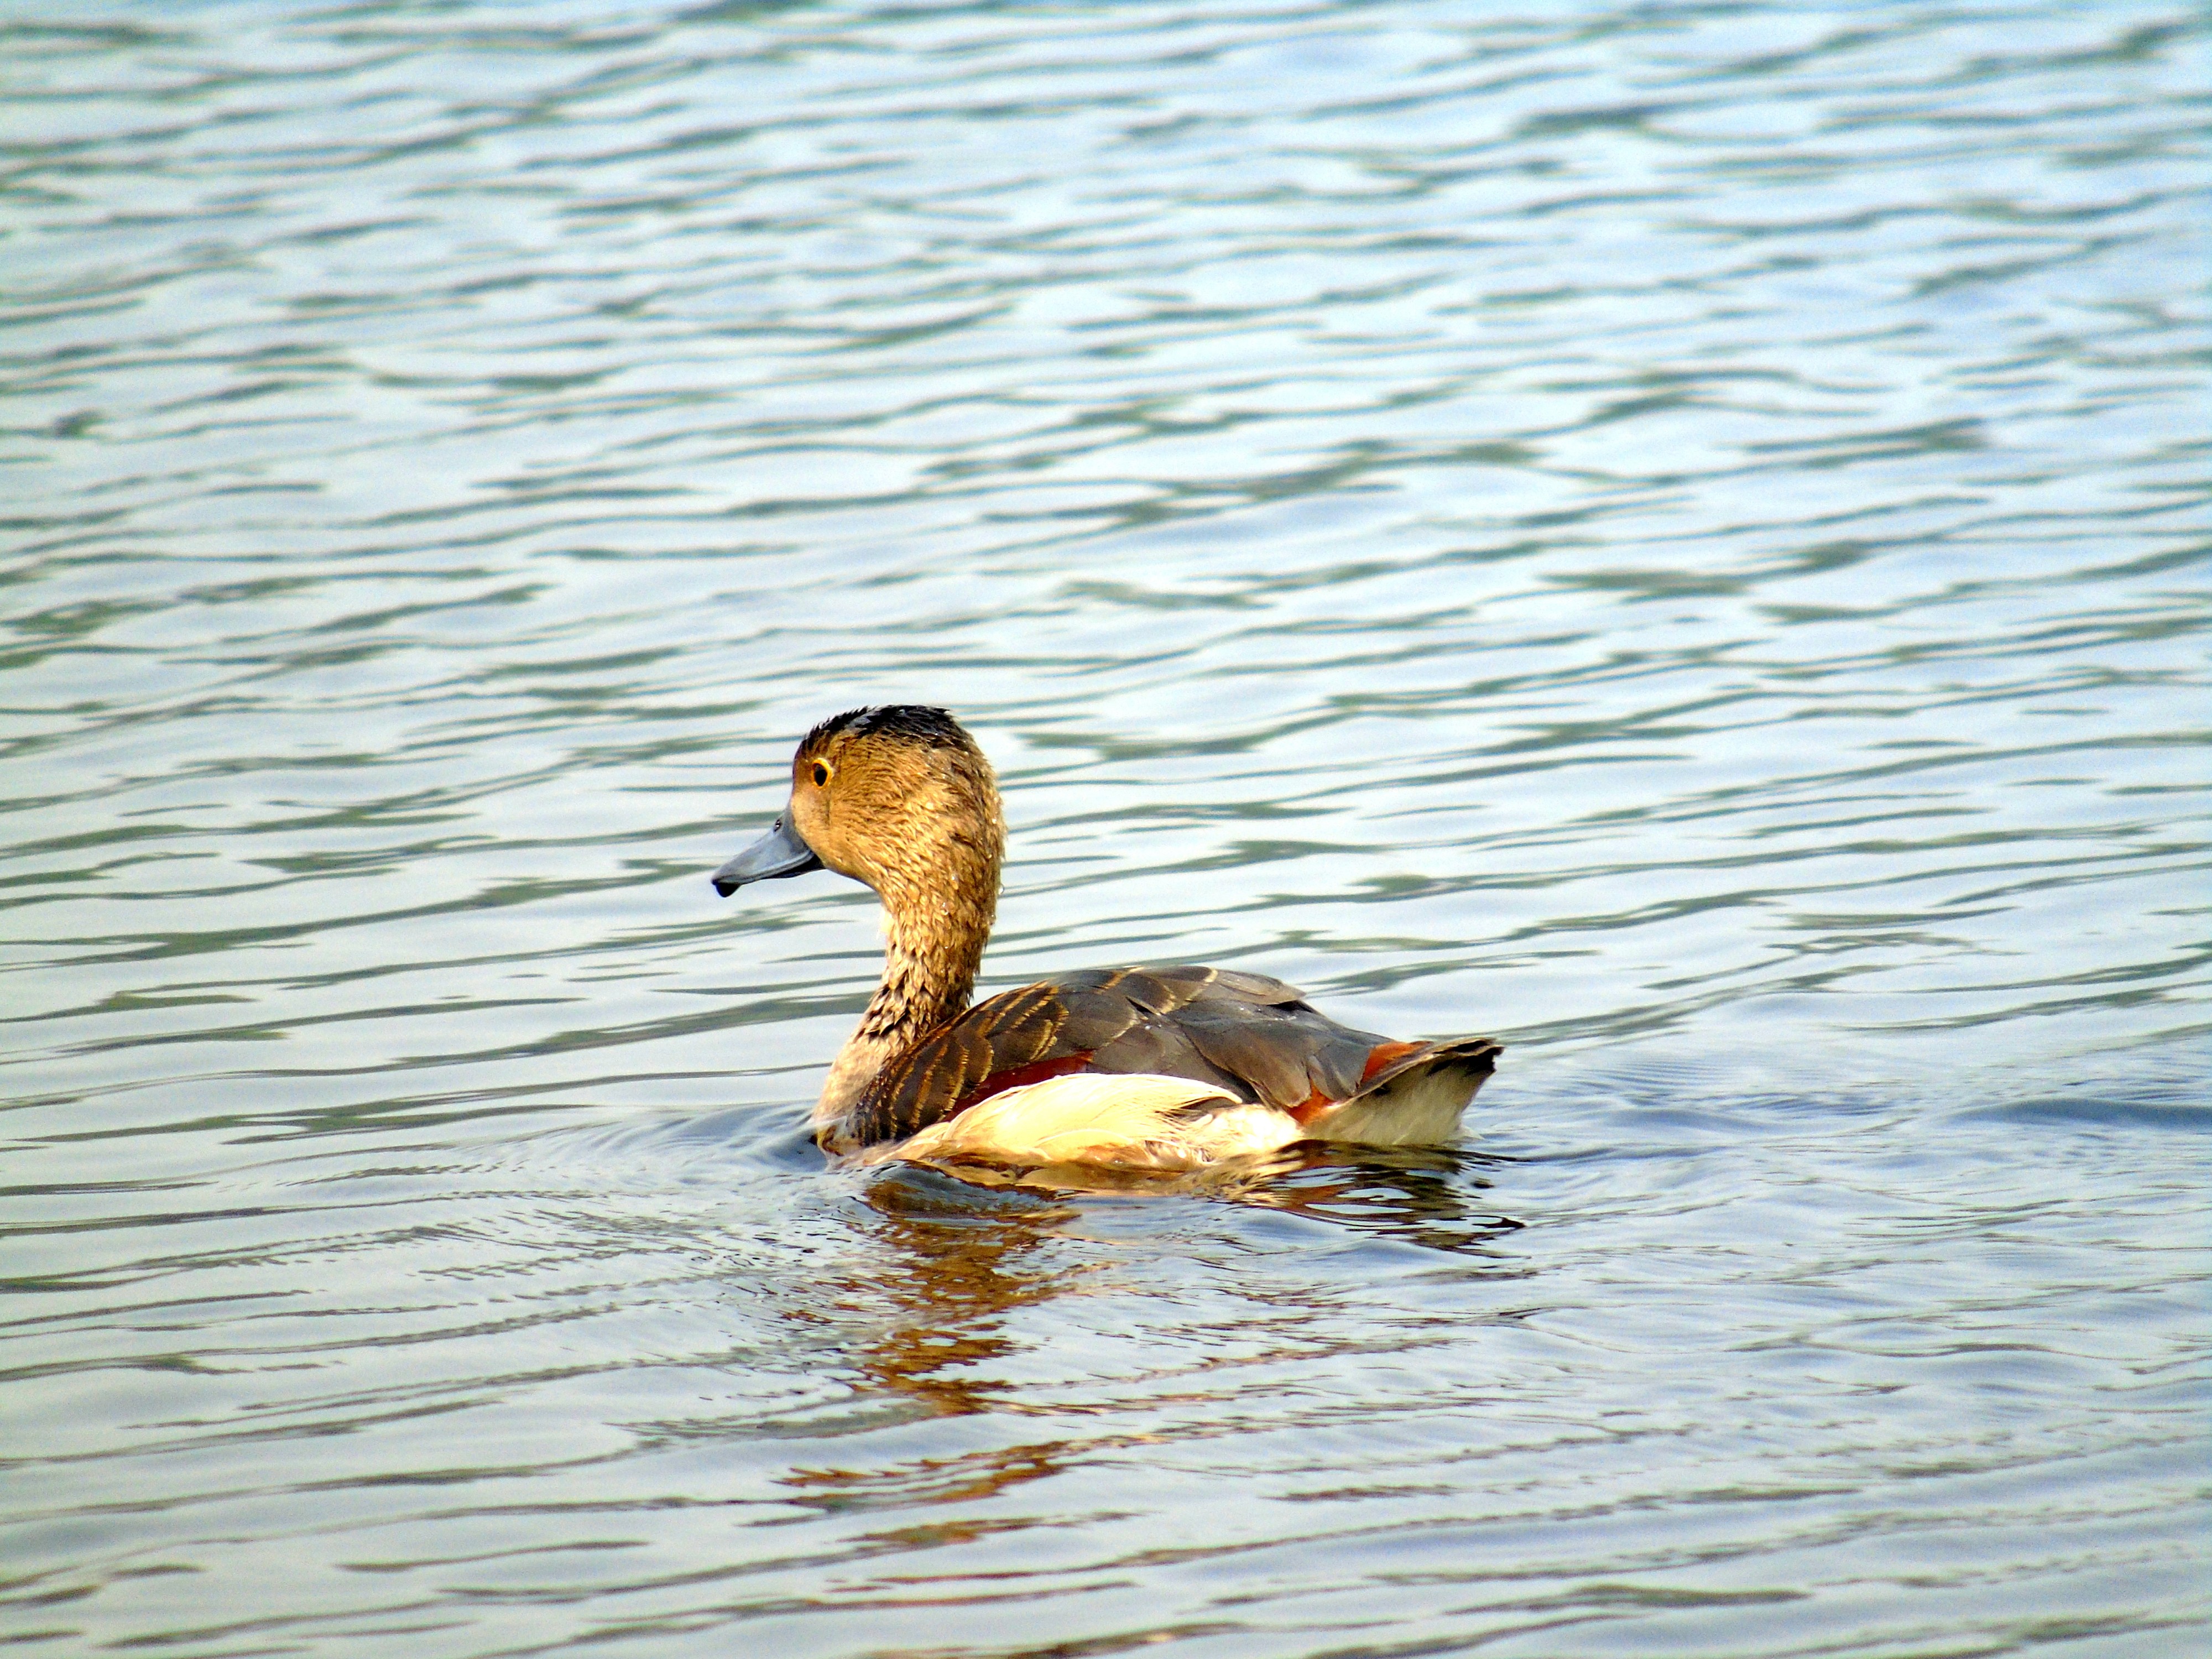 A LESSER WHISTLING DUCK